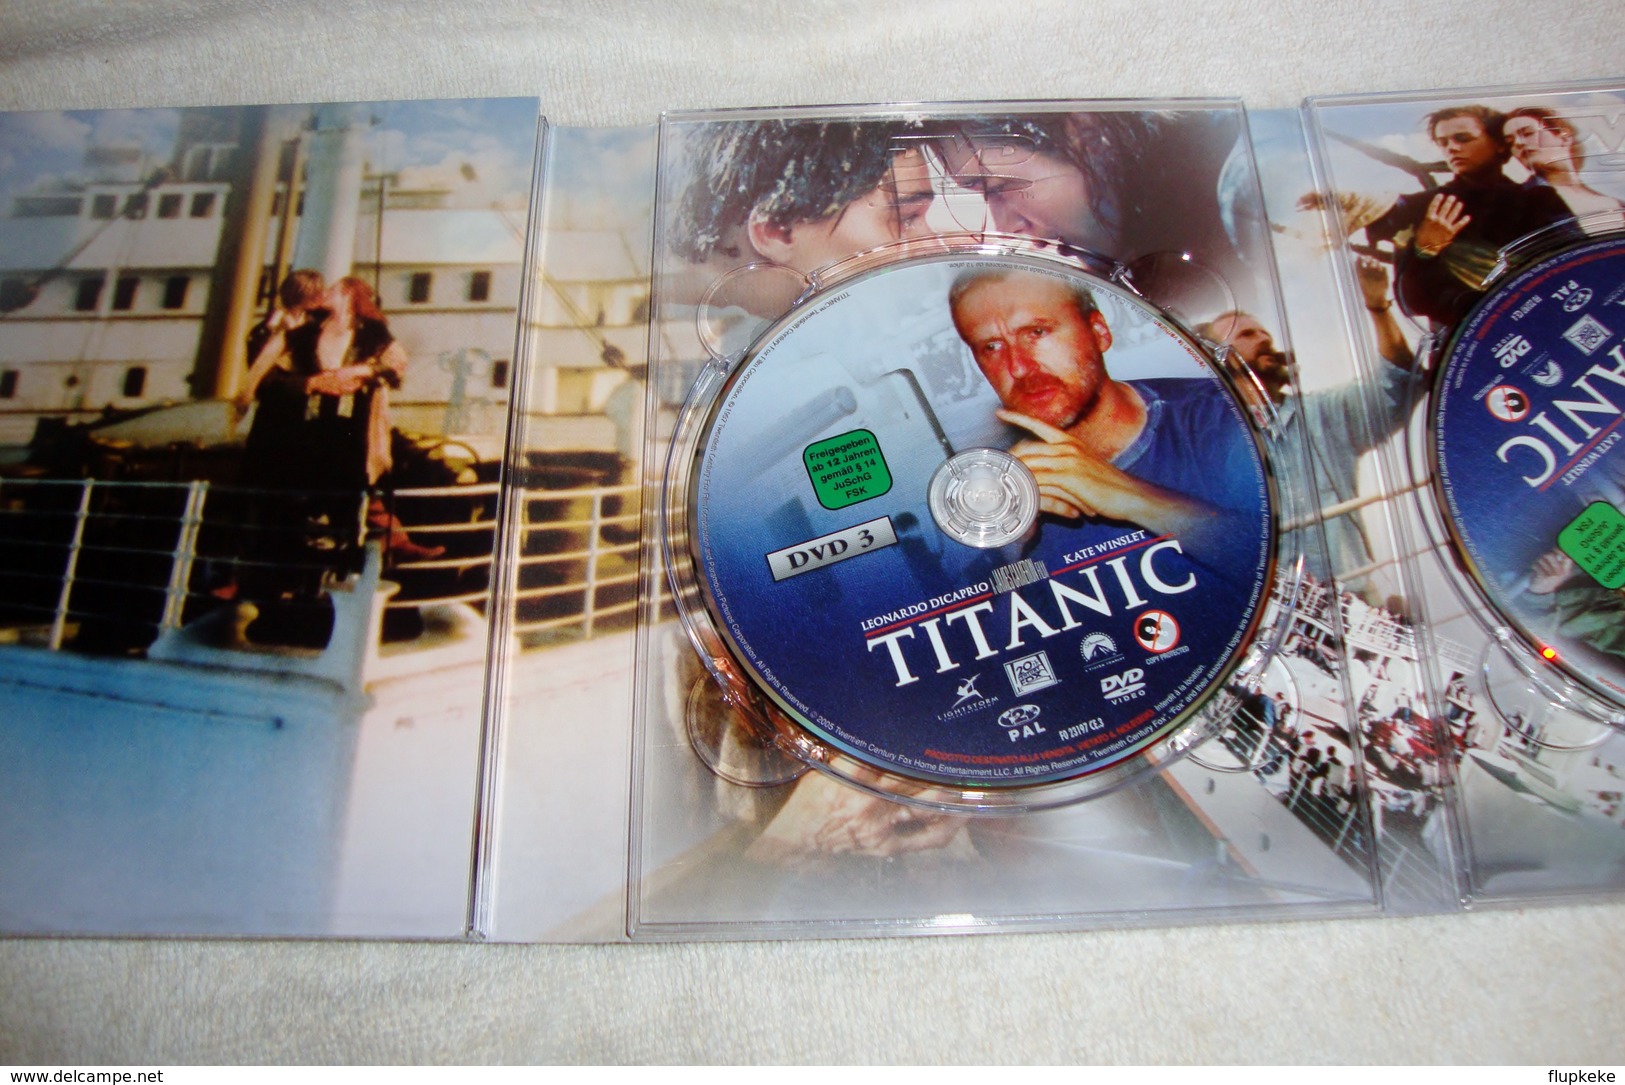 Dvd Zone 2 Titanic (1997) Édition Collector DeLuxe 4 dvd vf+Vostfr